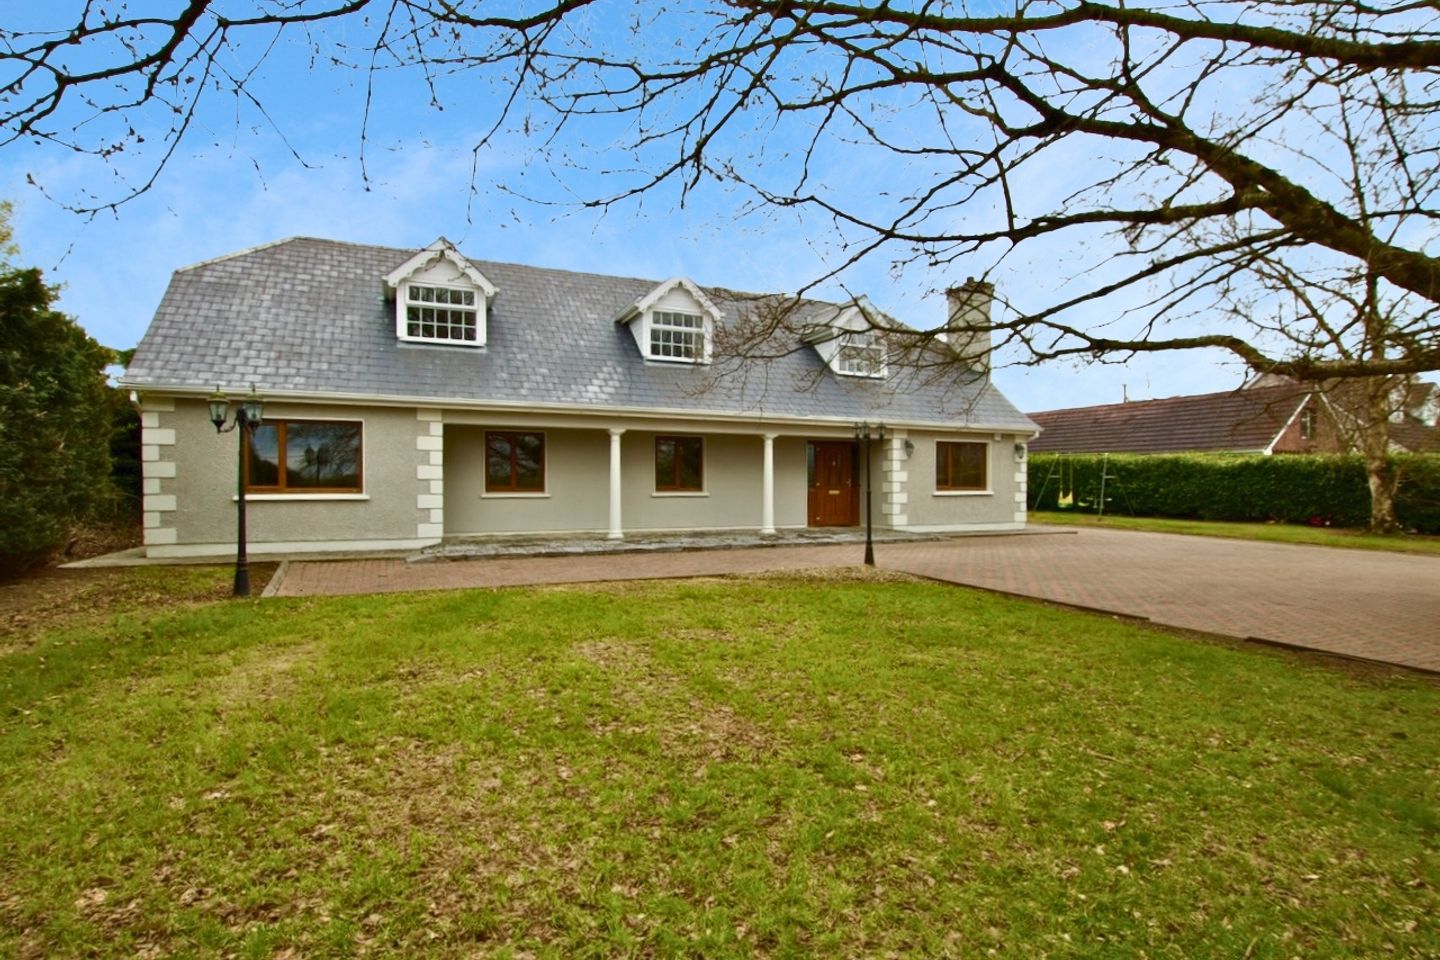 Laurel View, Clooncallow, Ballymahon, Co Longford, N39W567